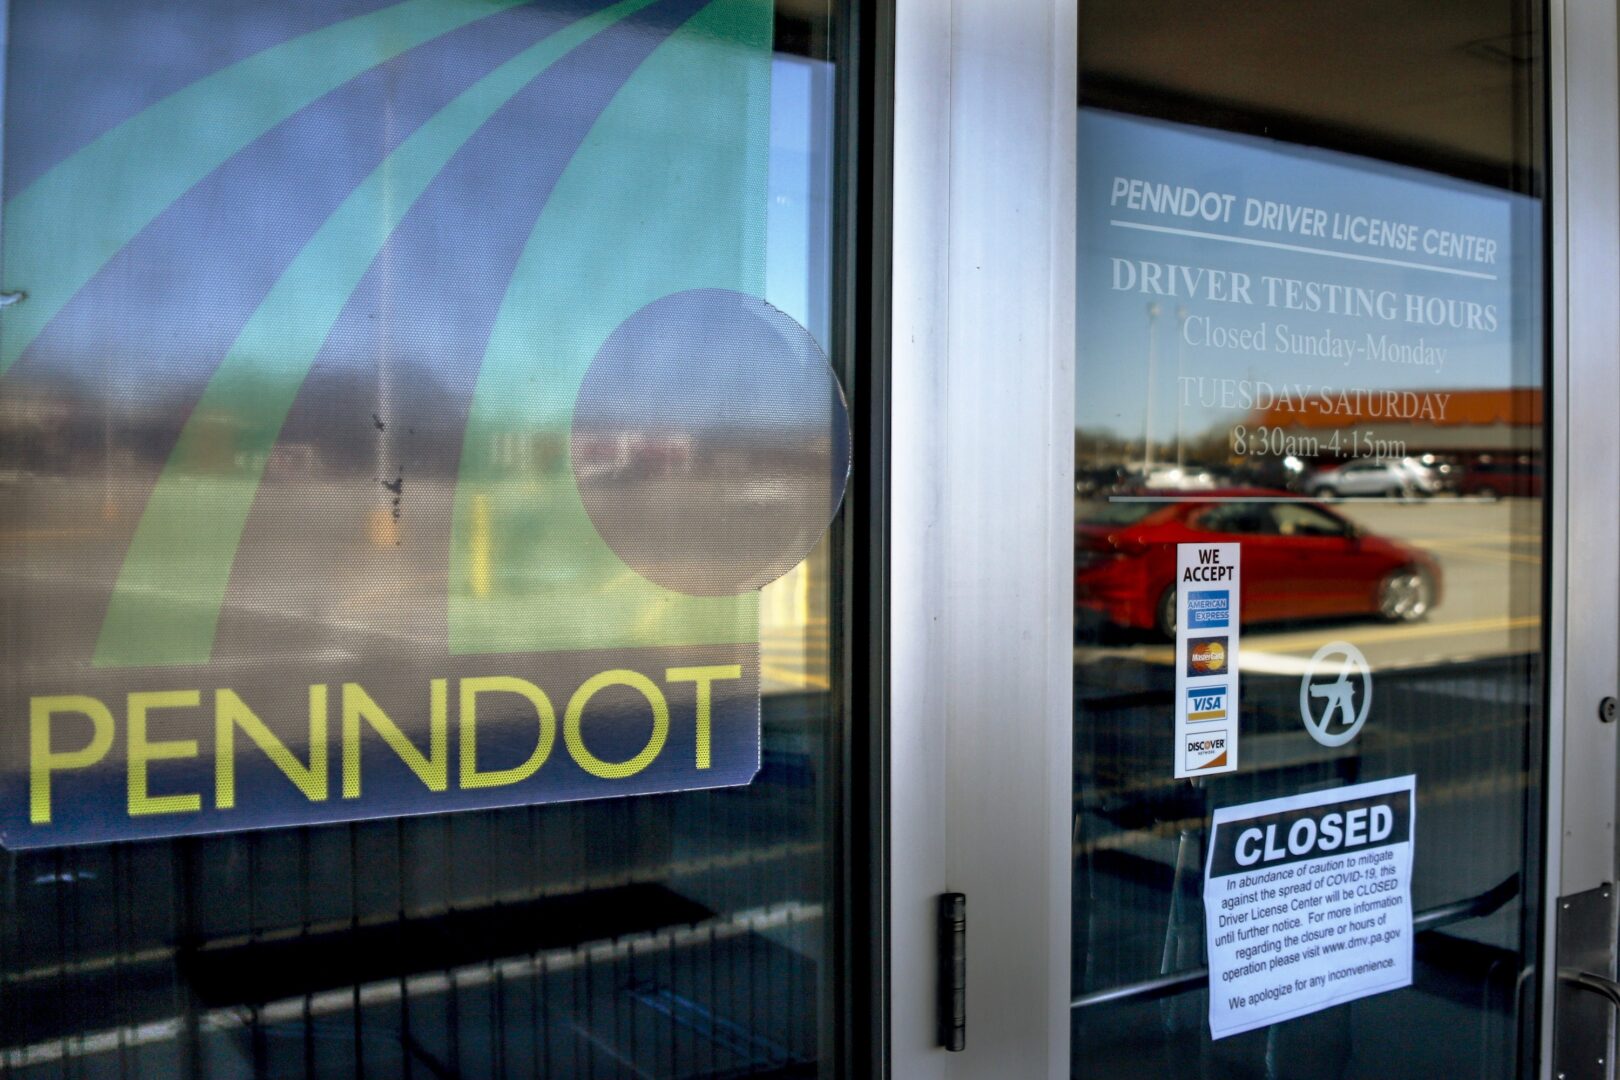 Closed signs are on the doors of the Penndot Drivers License Center in Butler, Pa., Friday, April 3, 2020.  